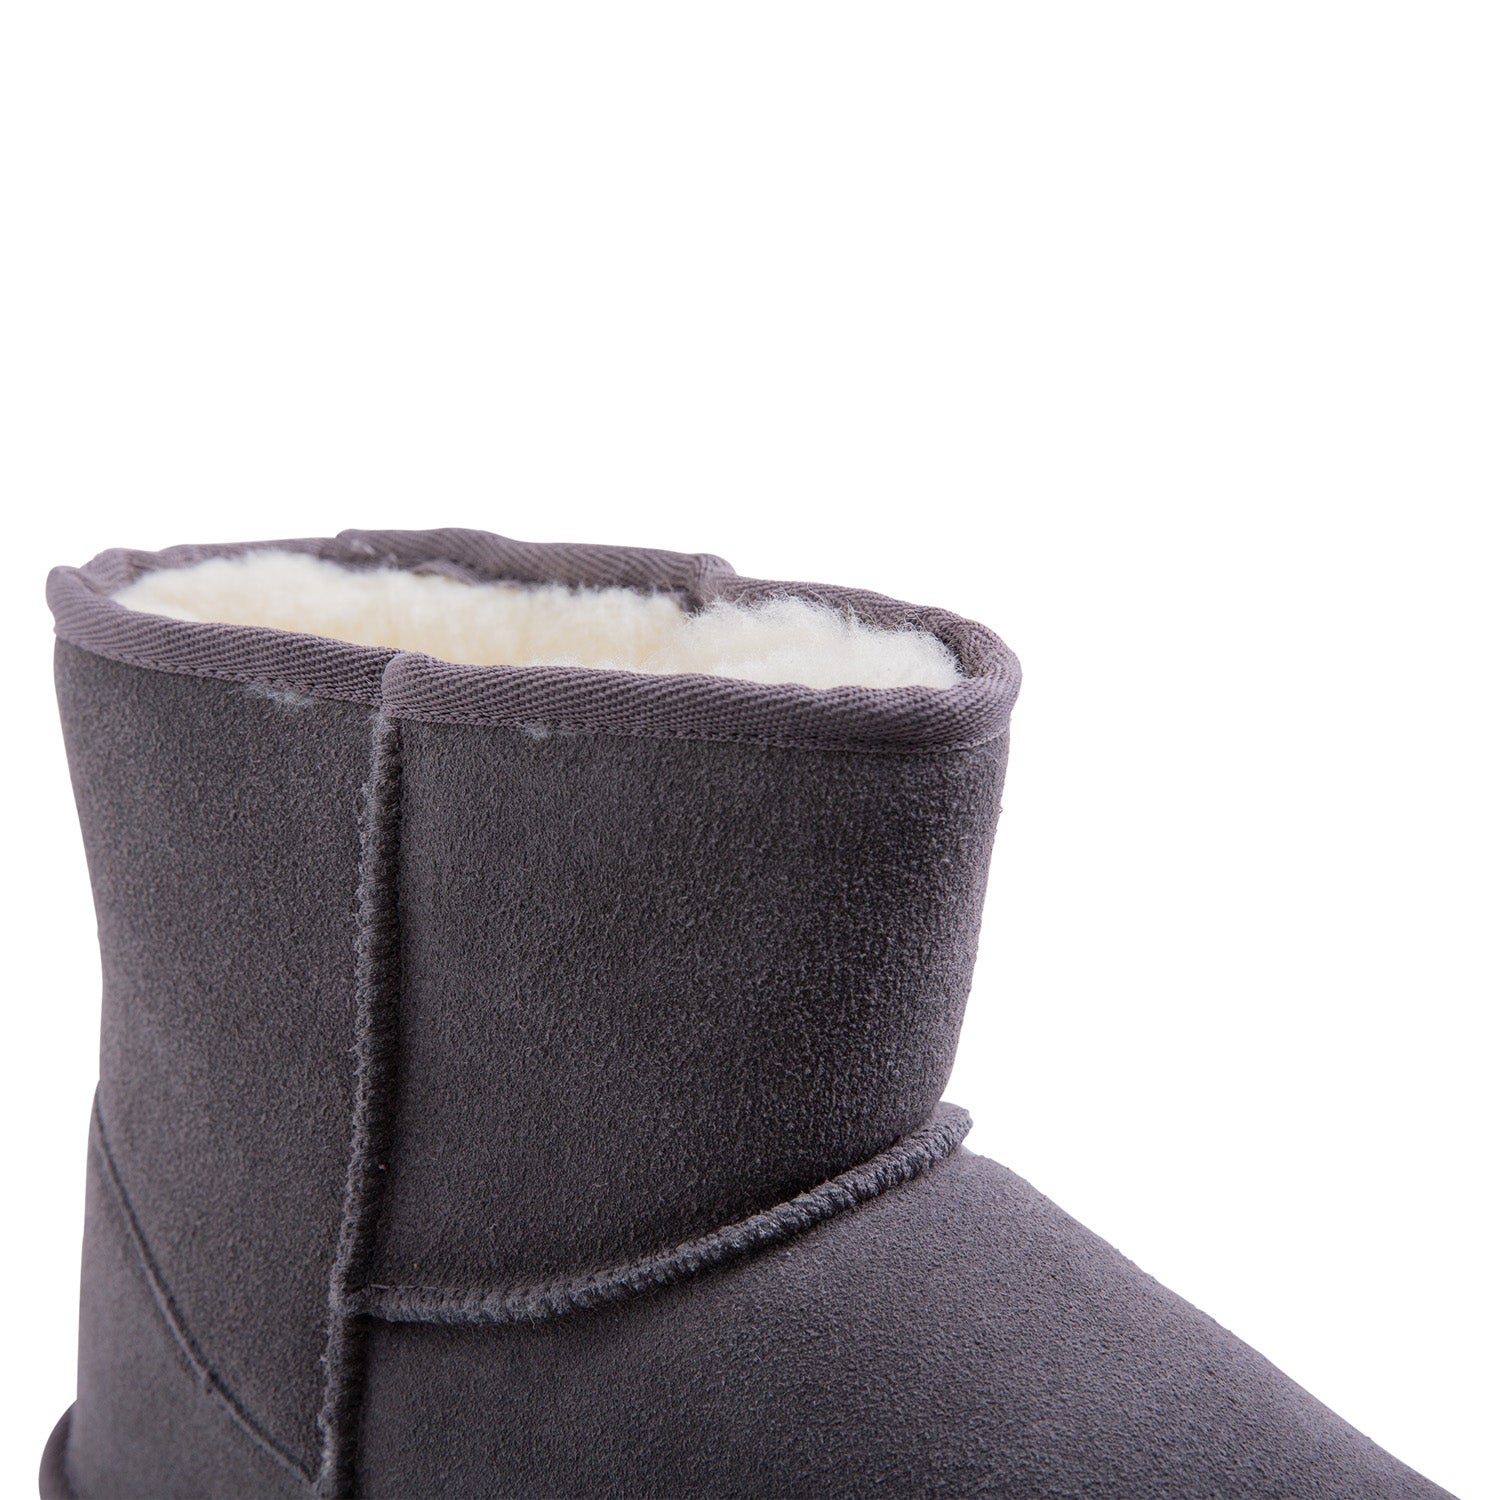 Royal Comfort Ugg Slipper Boots Mens Leather Upper Wool Lining Breathable-Other-PEROZ Accessories